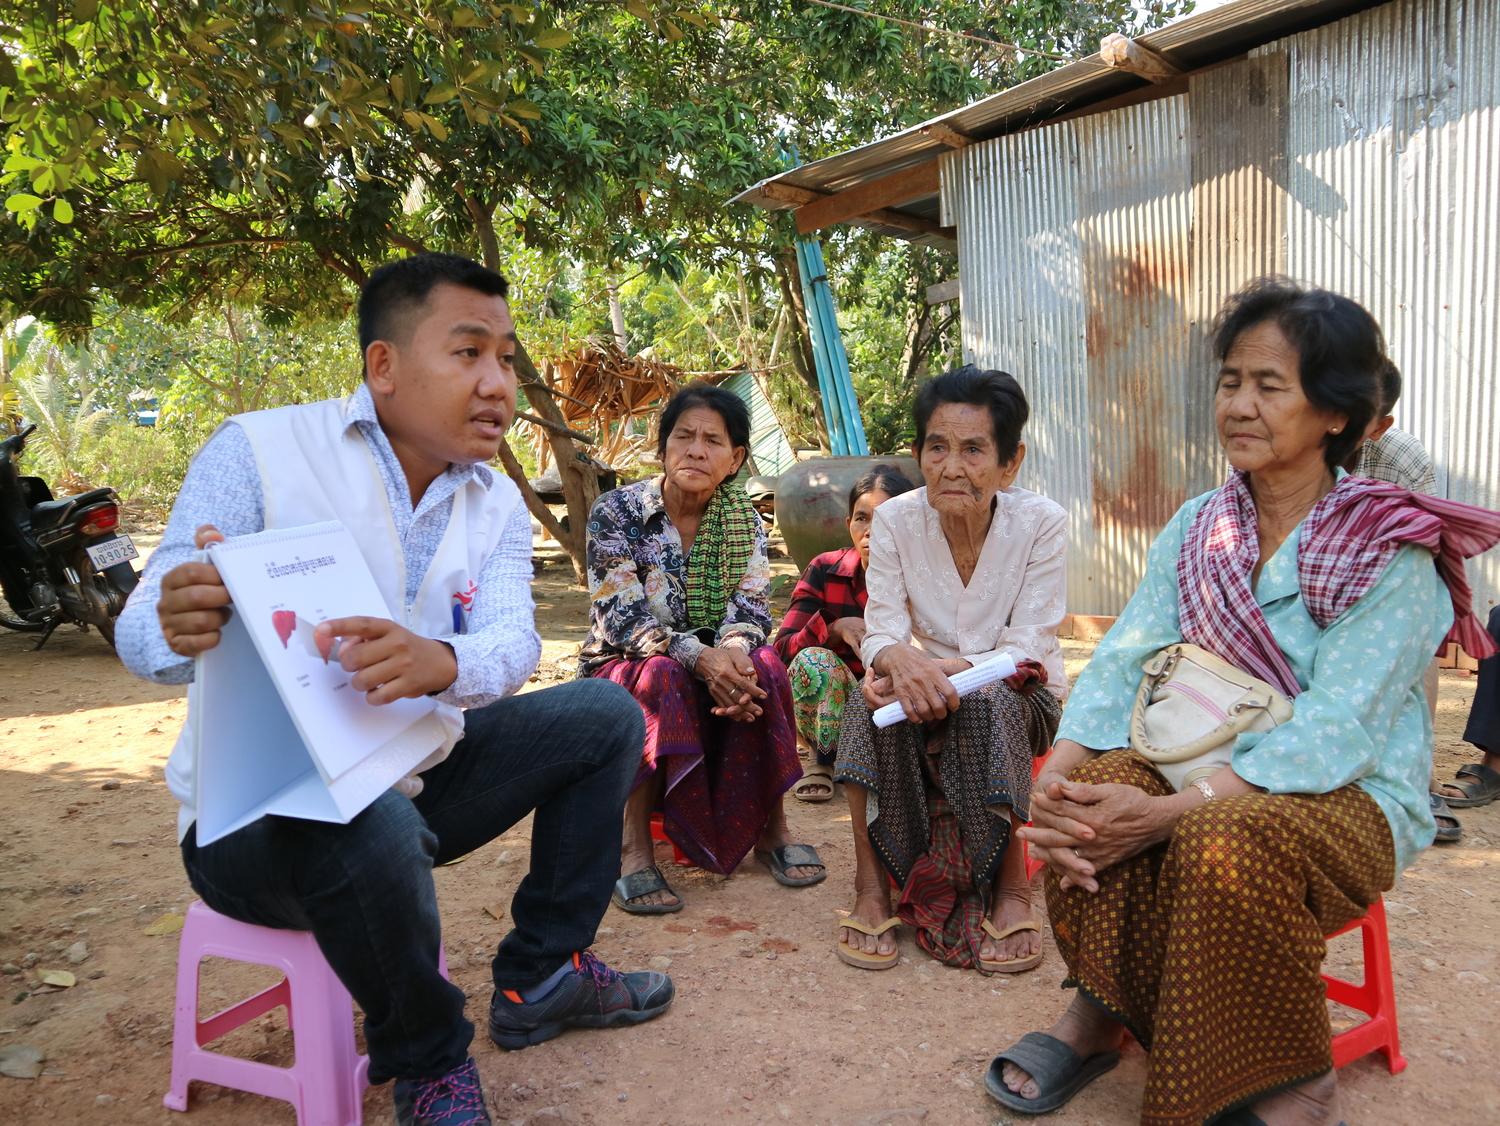 MSF’s member carries out information and education activities during an active hepatitis C case-finding campaign in a village in Moung Ruessei district. Cambodia, January 2019. 